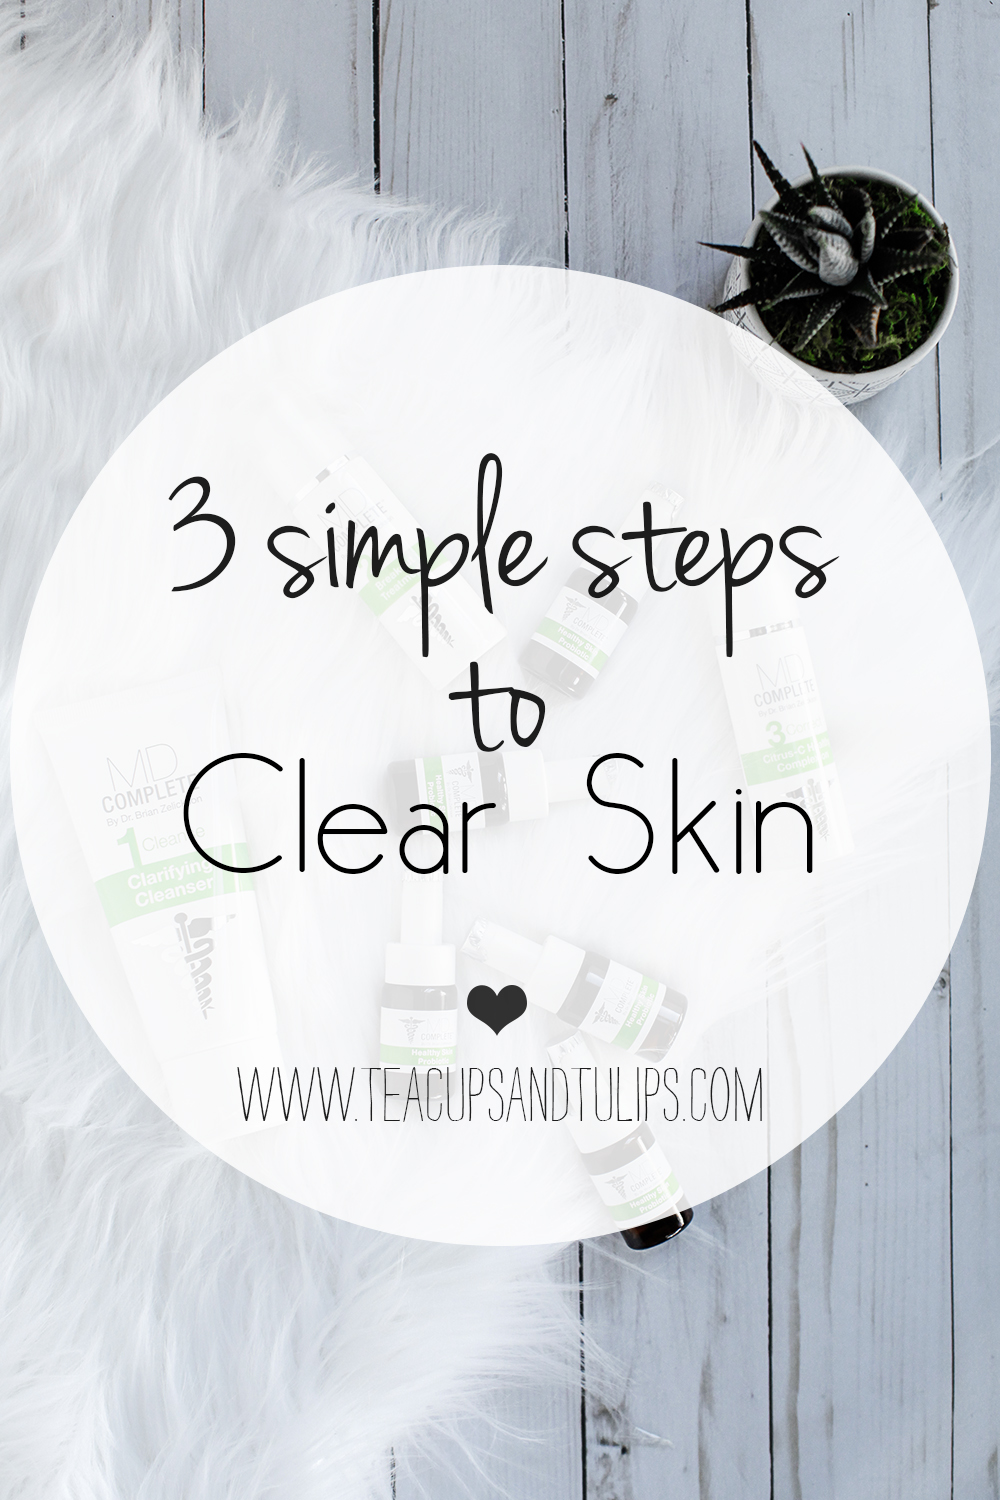 3 simple steps to clear skin